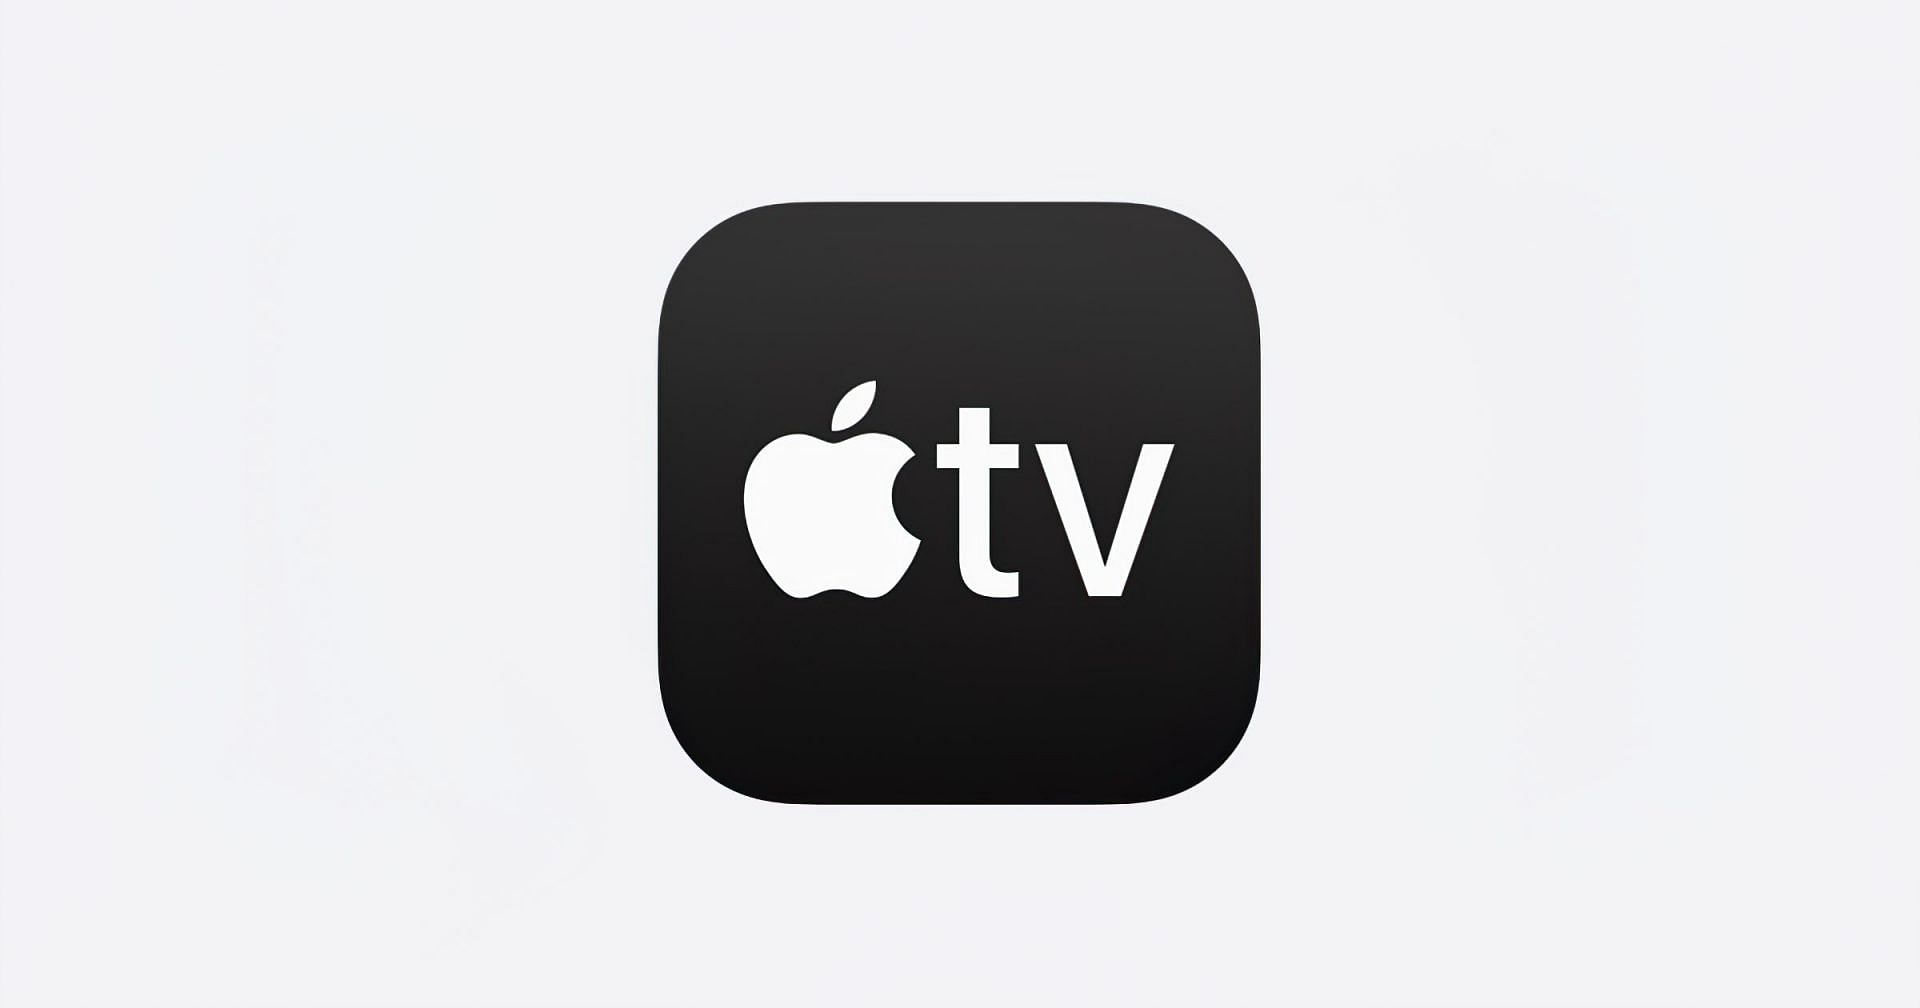 Apple TV emerges as an excellent streaming platform with exceptional video quality. (Image via Apple)